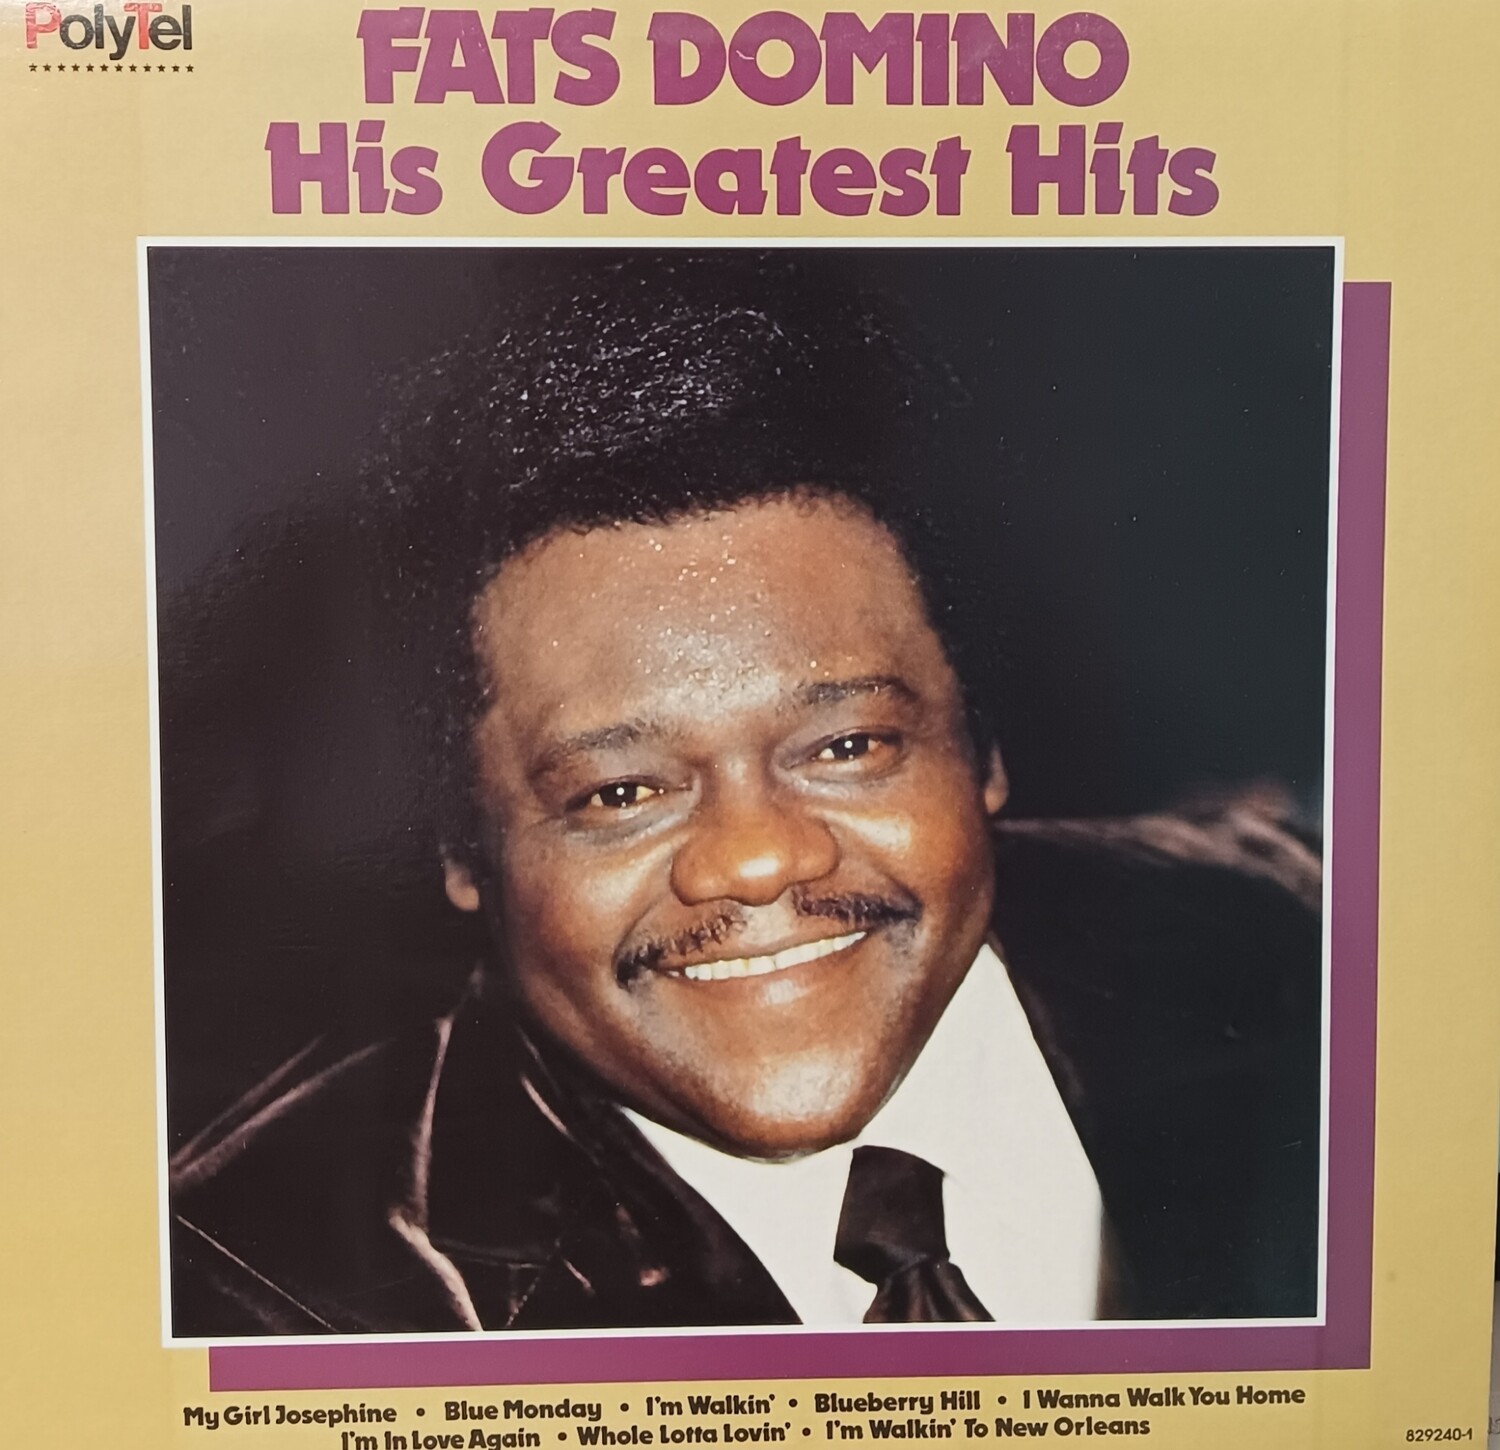 Fats Domino - His Greatest Hits